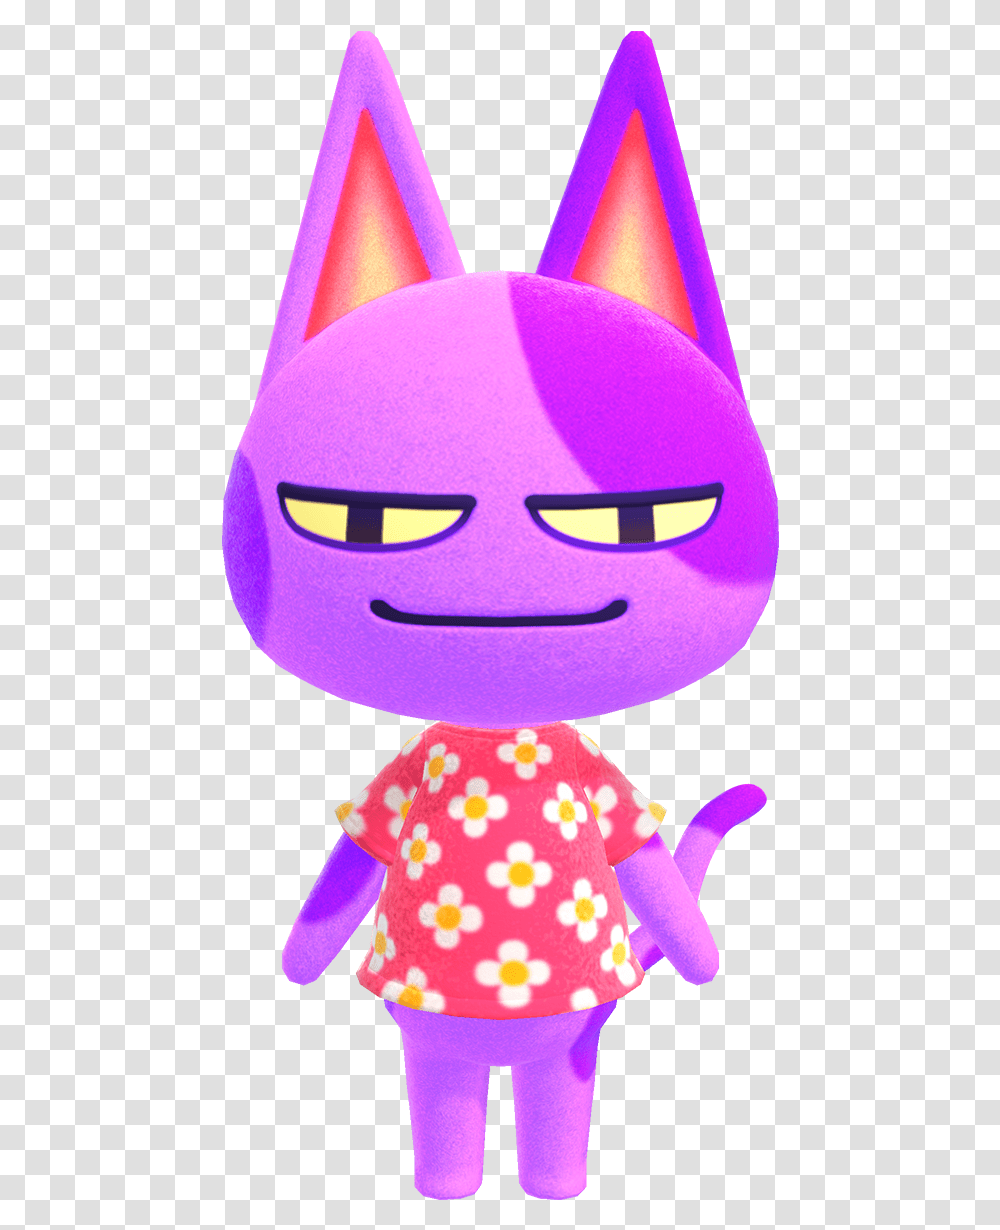 Bob Animal Crossing Wiki Nookipedia Bob From Animal Crossing, Doll, Toy, Figurine, Person Transparent Png